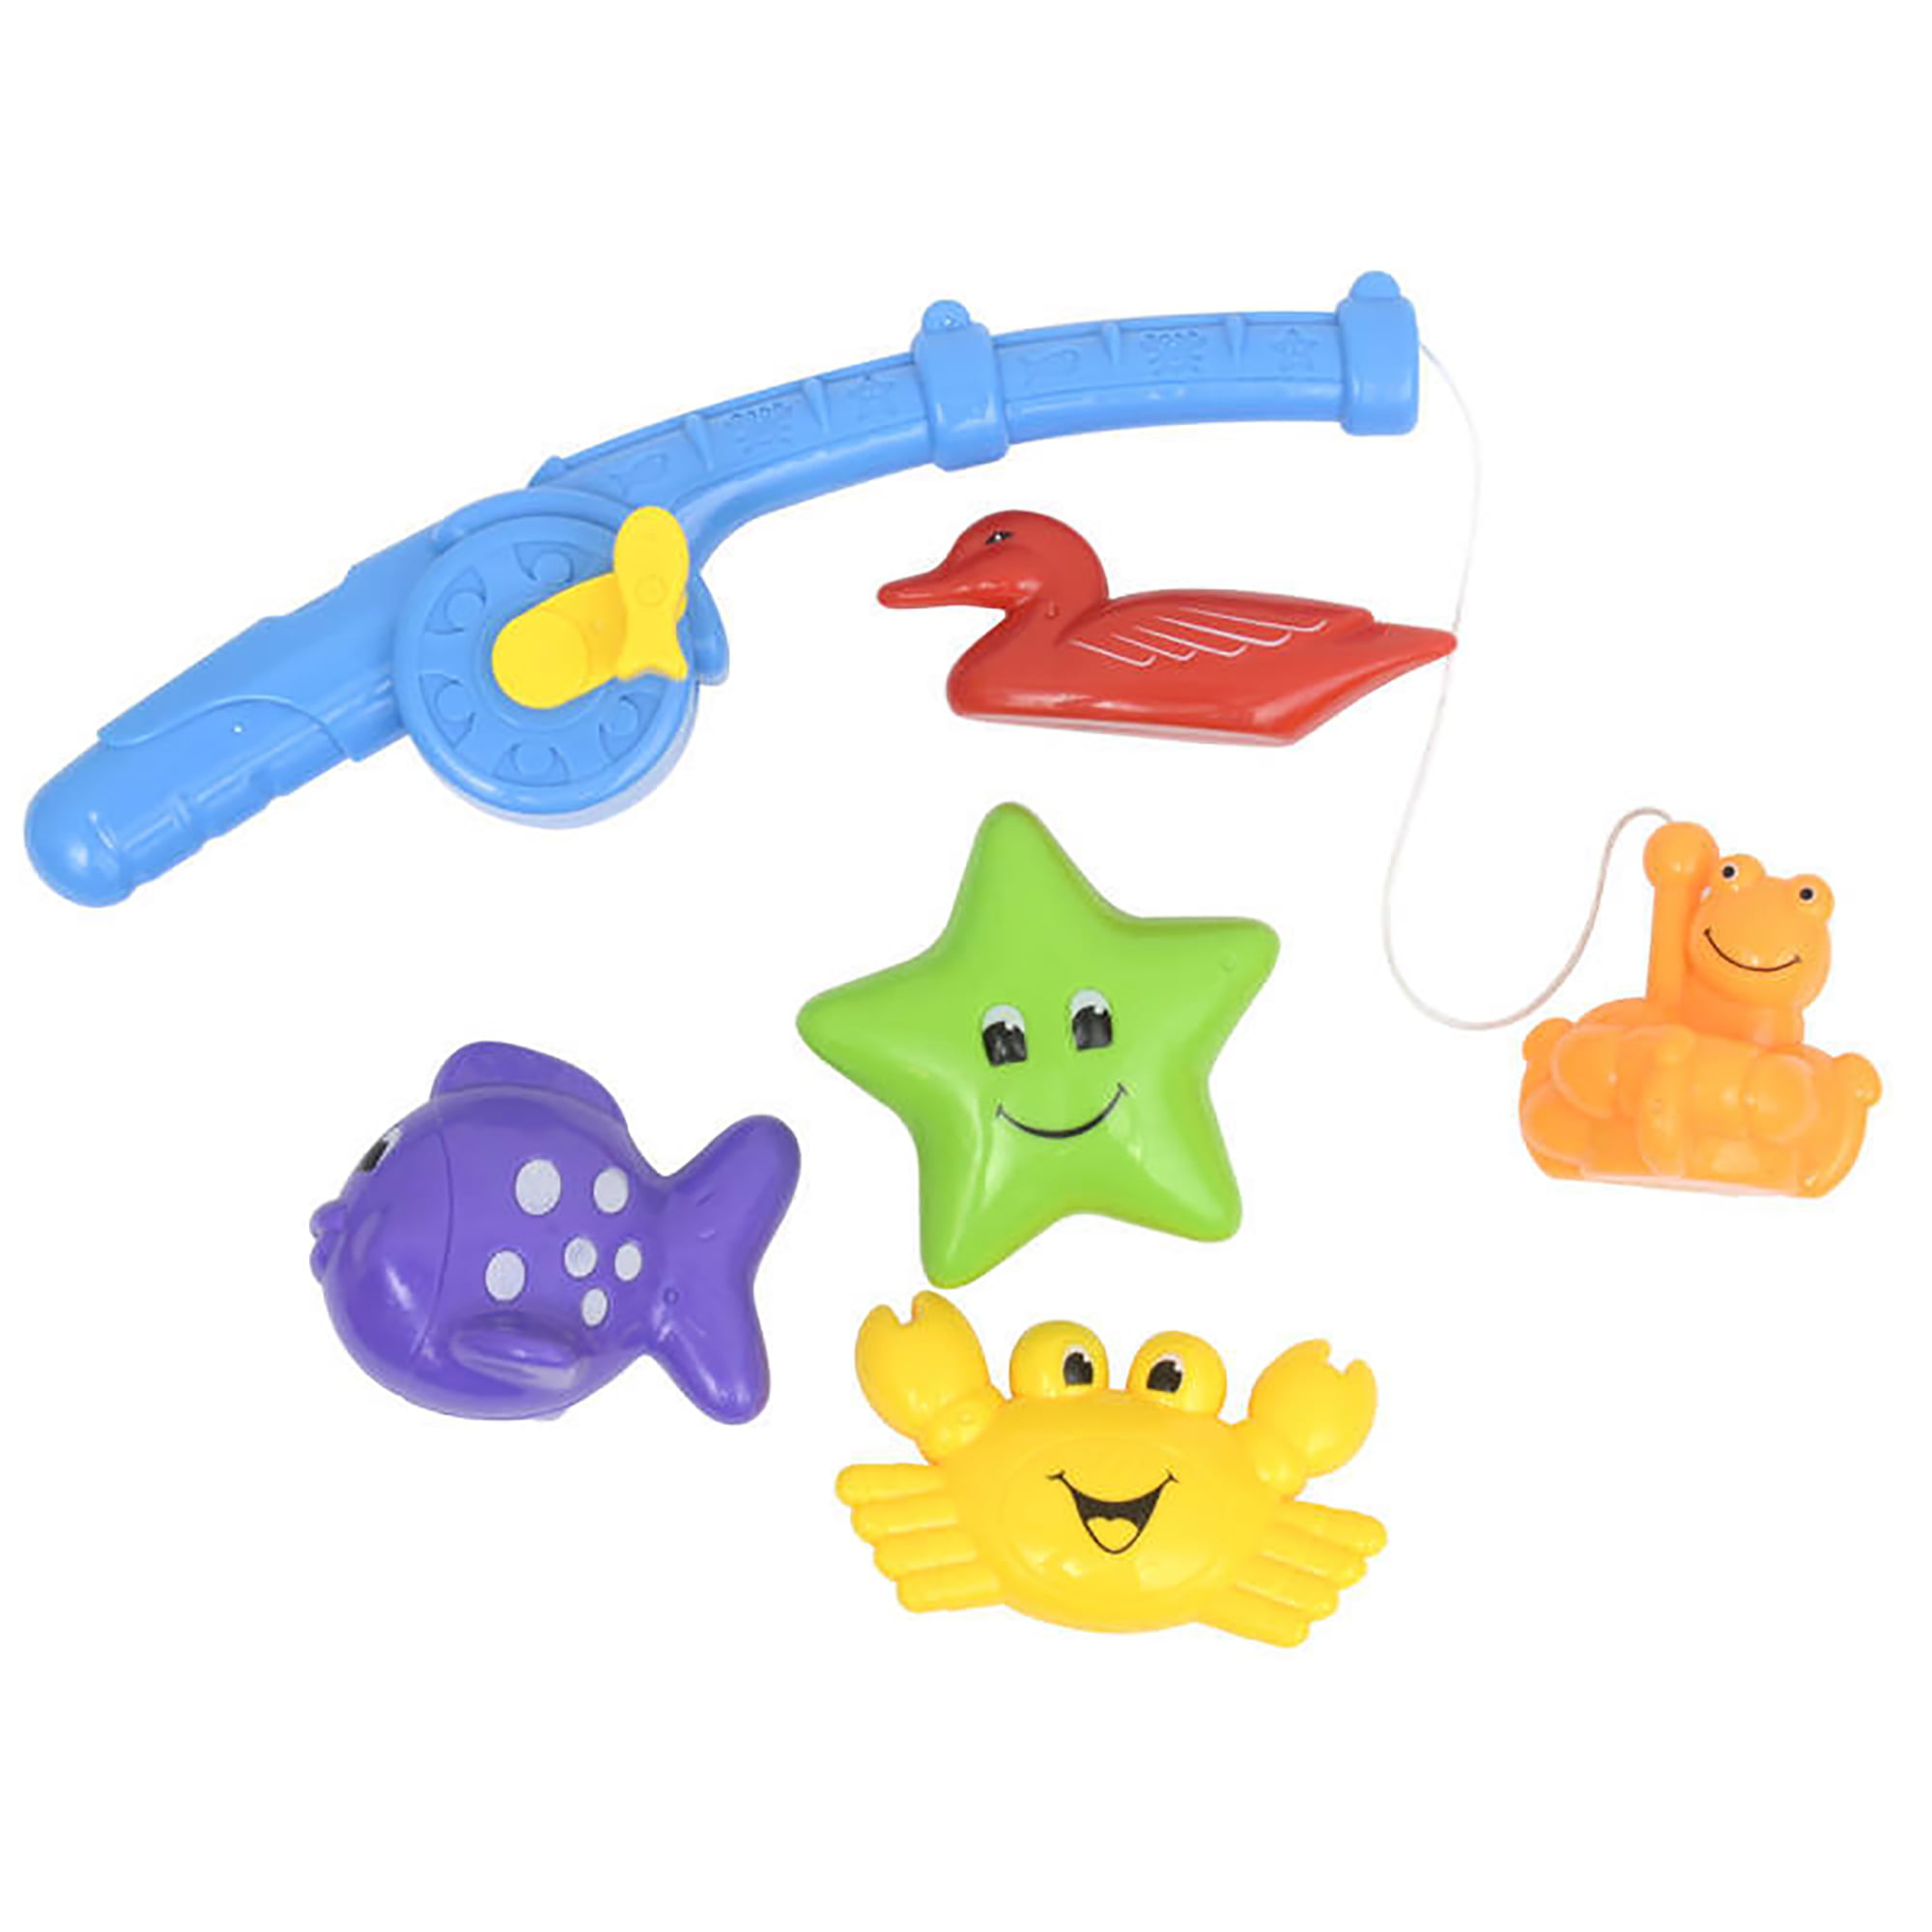 Children's Magnetic Fishing Toy Plastic Rod Fish Fun Game Baby Bath Toys Gift